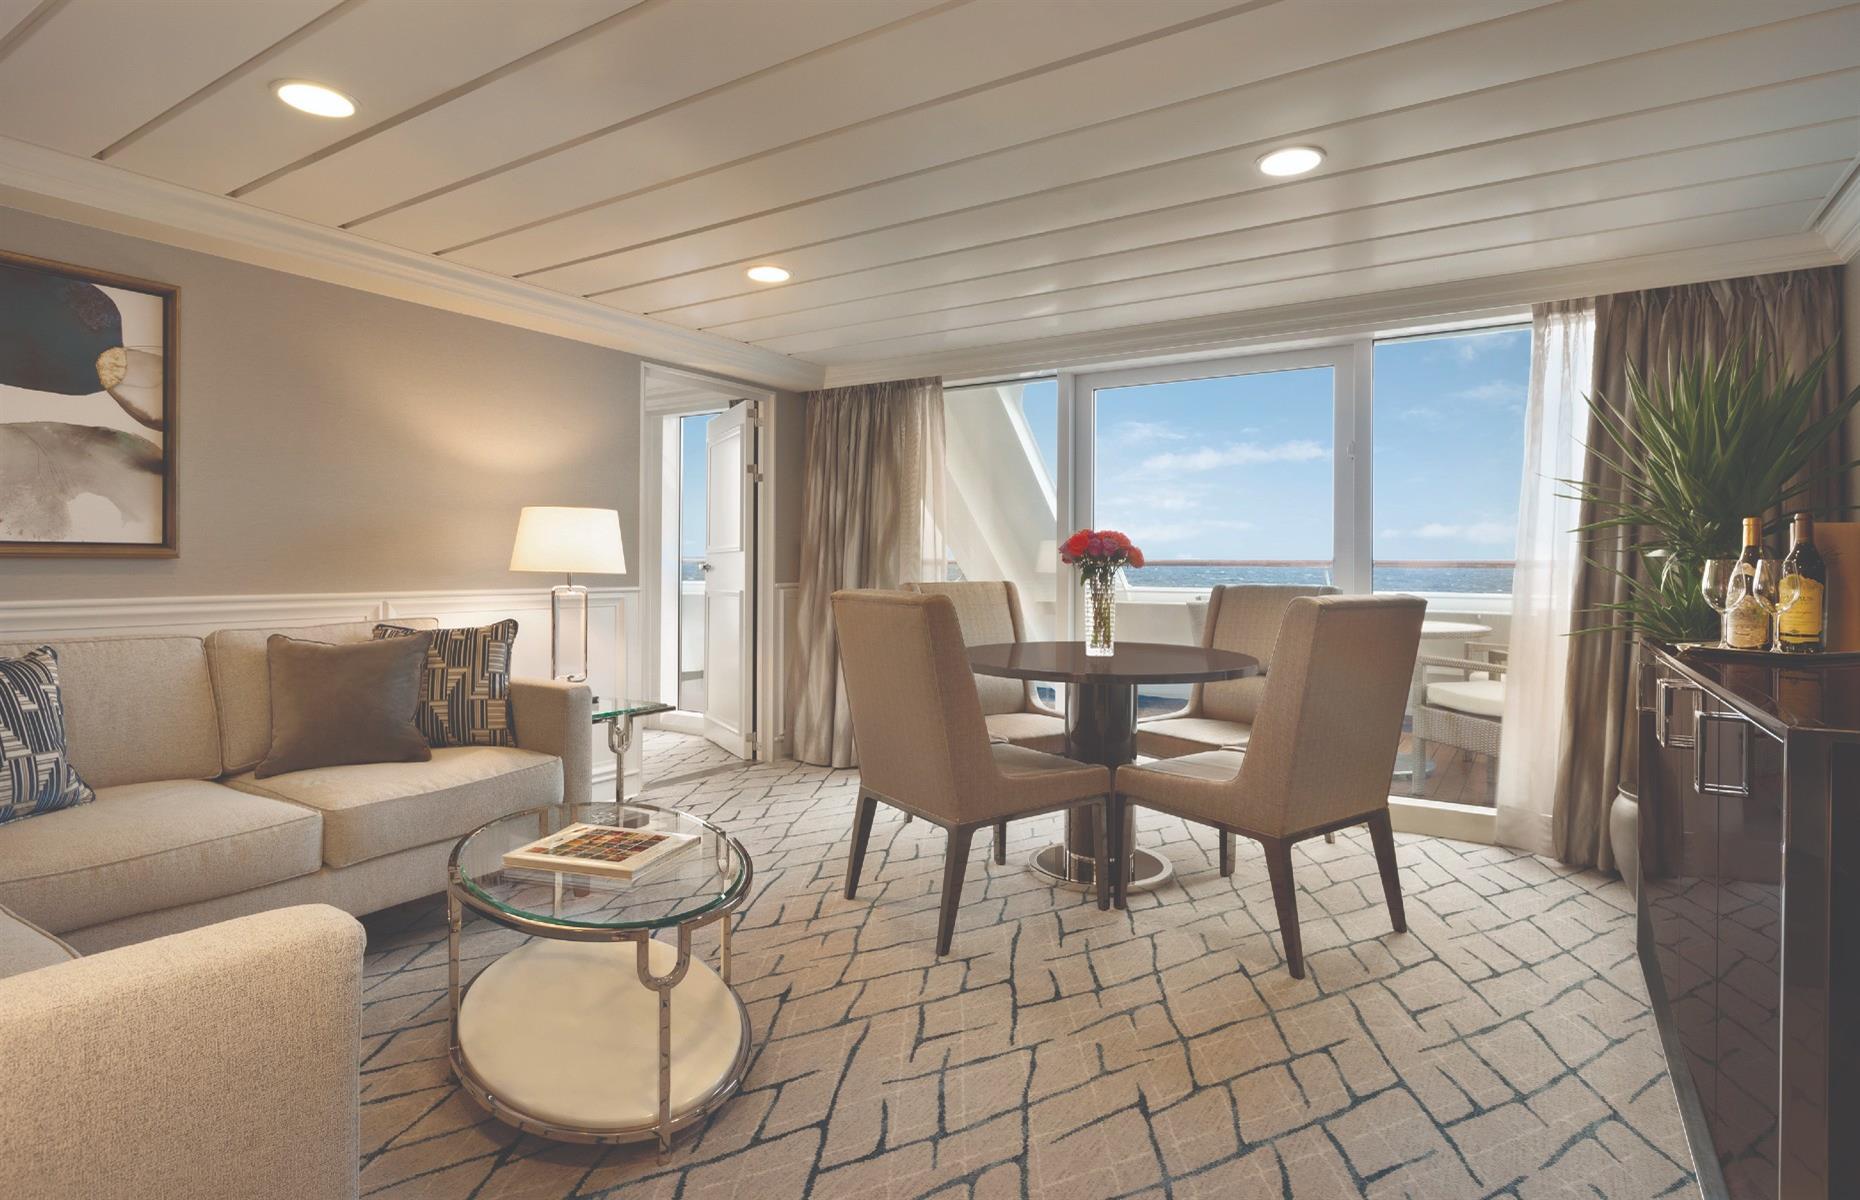 <p><a href="https://www.oceaniacruises.com/ships/regatta/">Regatta</a> is the flagship vessel of Oceania Cruises' fleet and a shining example of the OceaniaNEXT rebuild of the brand’s four 684-guest Regatta Class ships. Her 342 lavish suites and staterooms showcase designer furnishings, while the reimagined public spaces feature Tuscan marble, a revamped colour palette of soft sea and sky tones, works of art and a tasteful renewal of fabrics, furnishings and light fixtures.</p>